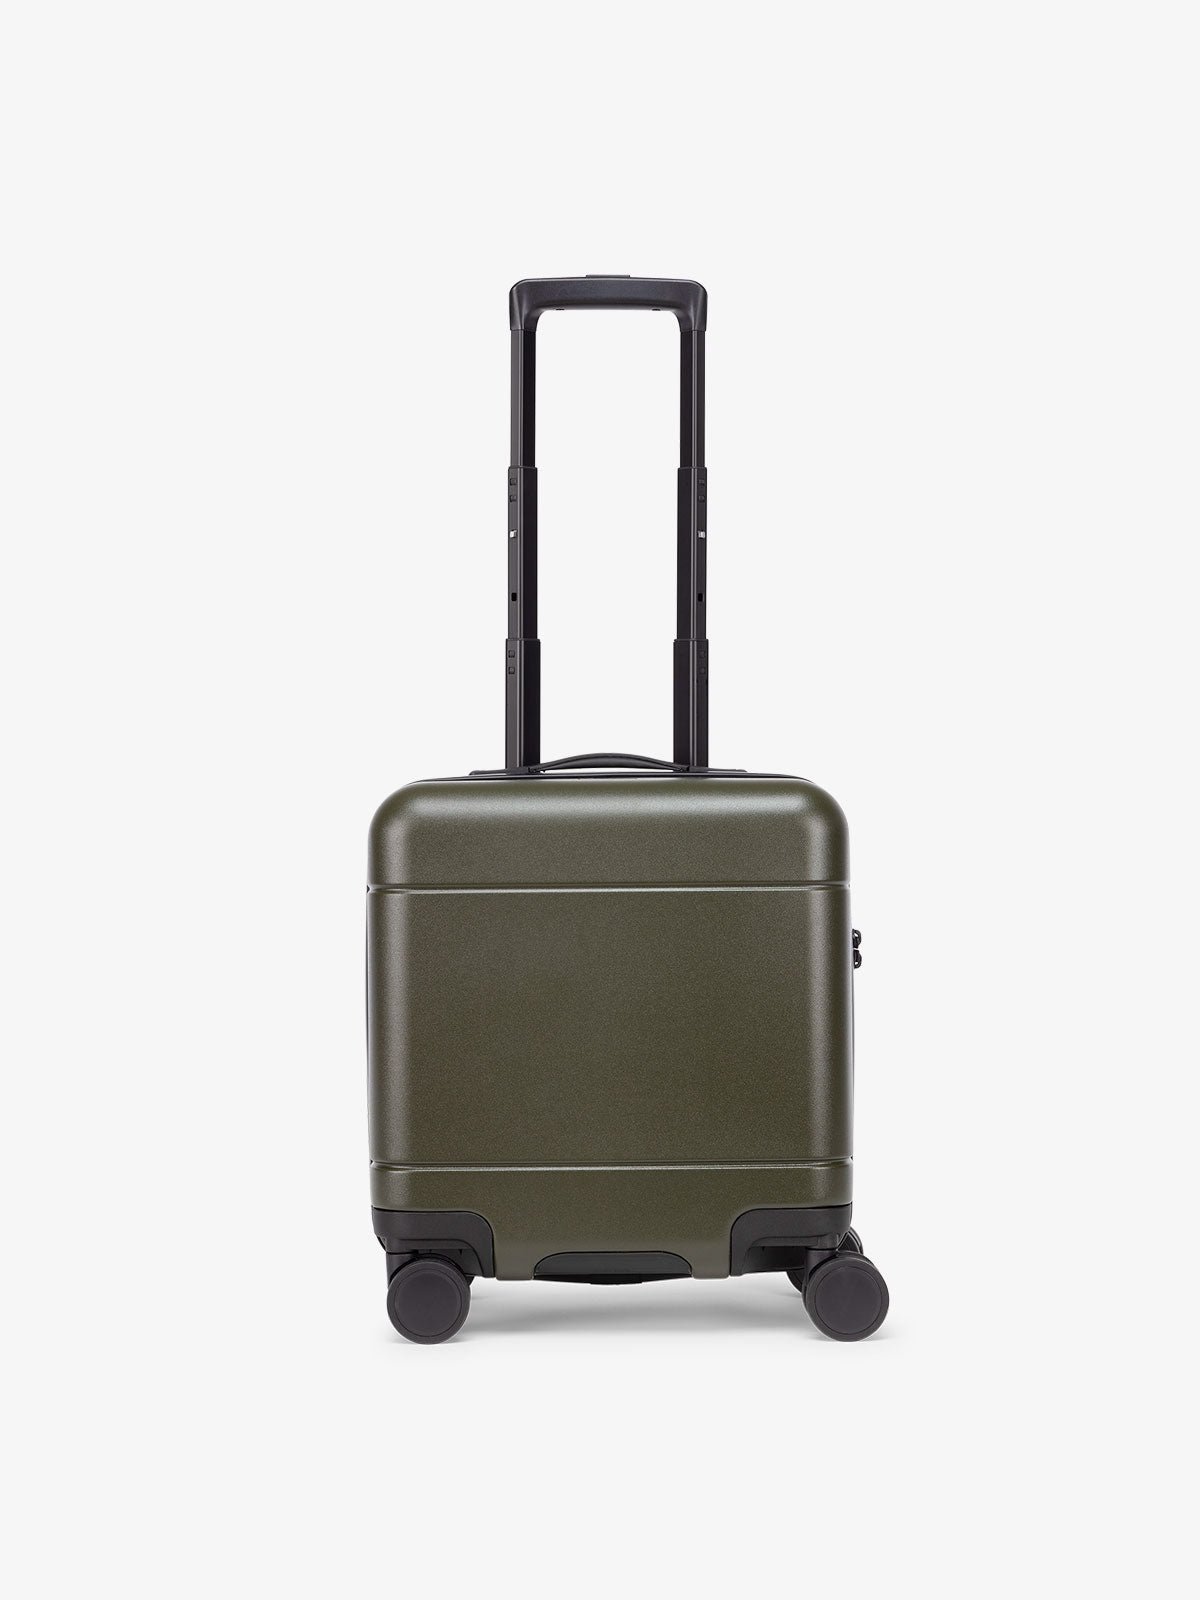 Hue mini carry on luggage in moss green